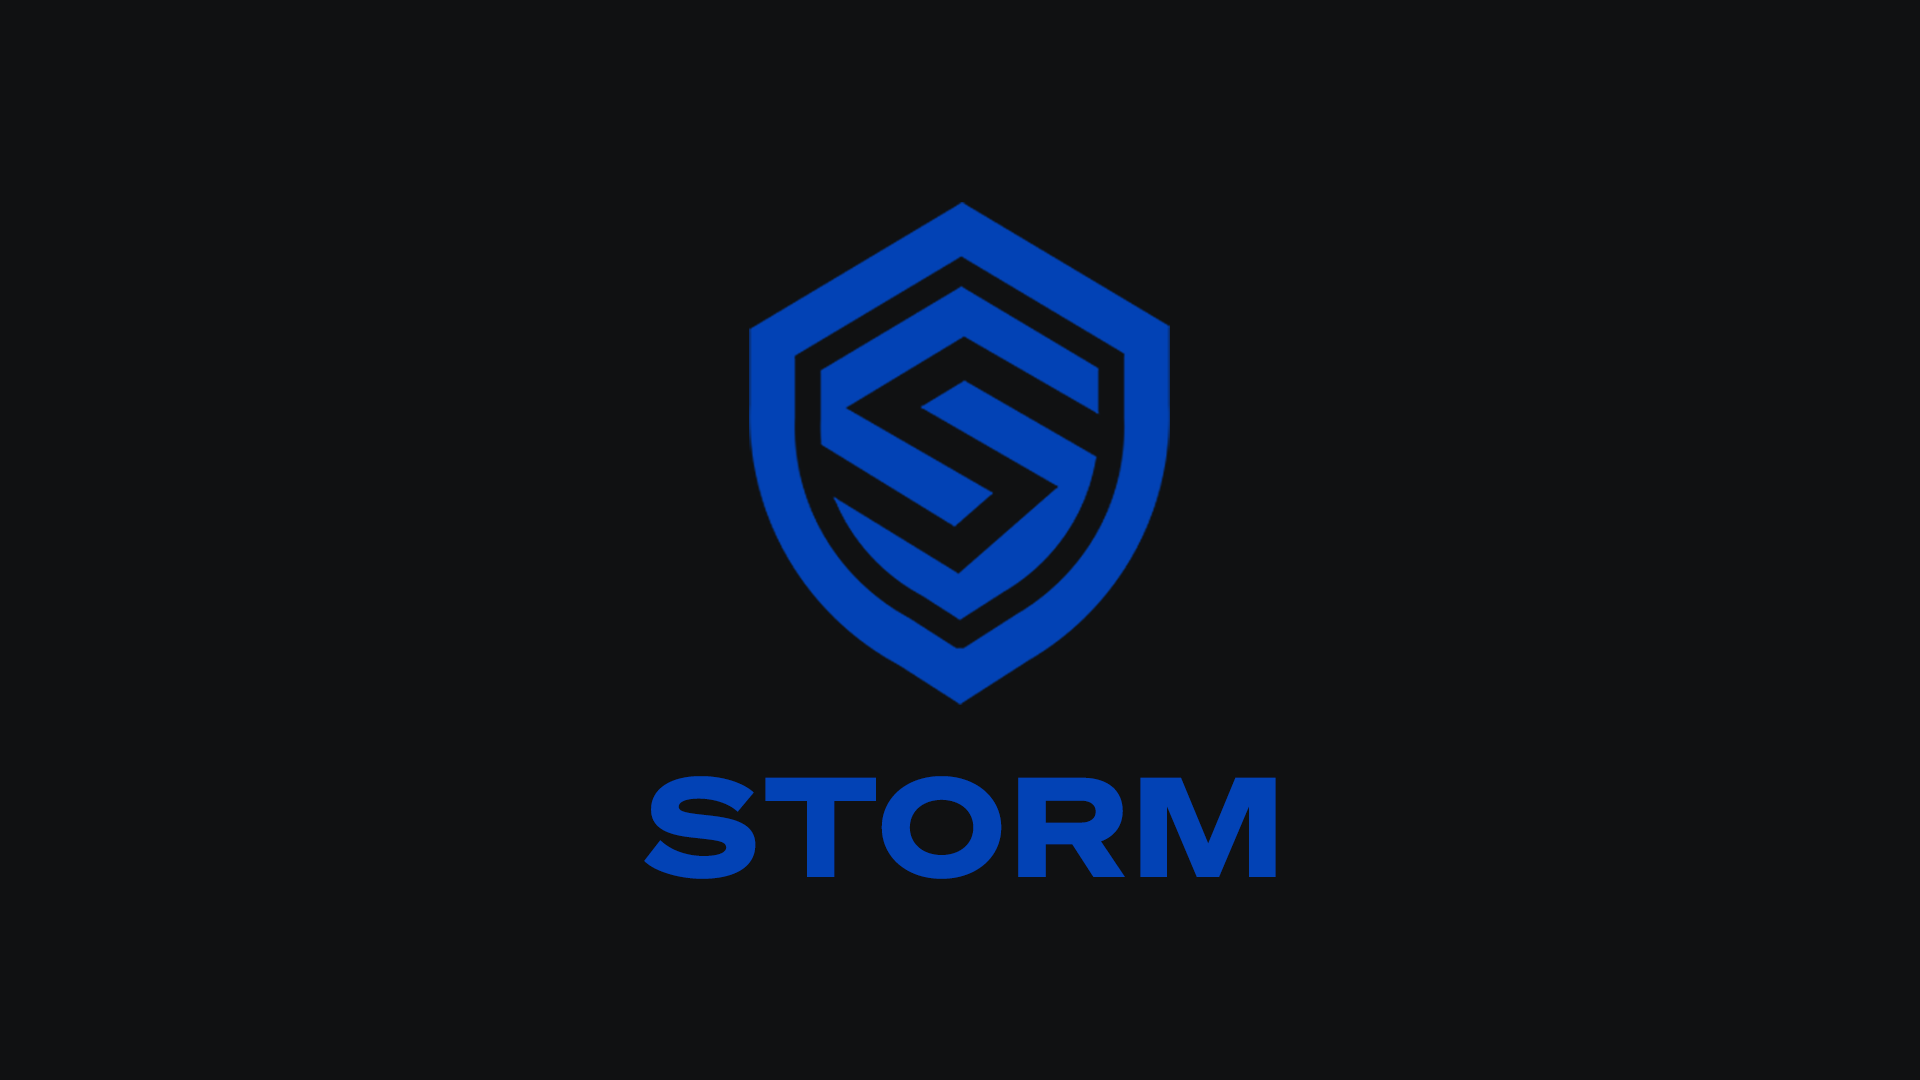 Partnership with STORM Systems